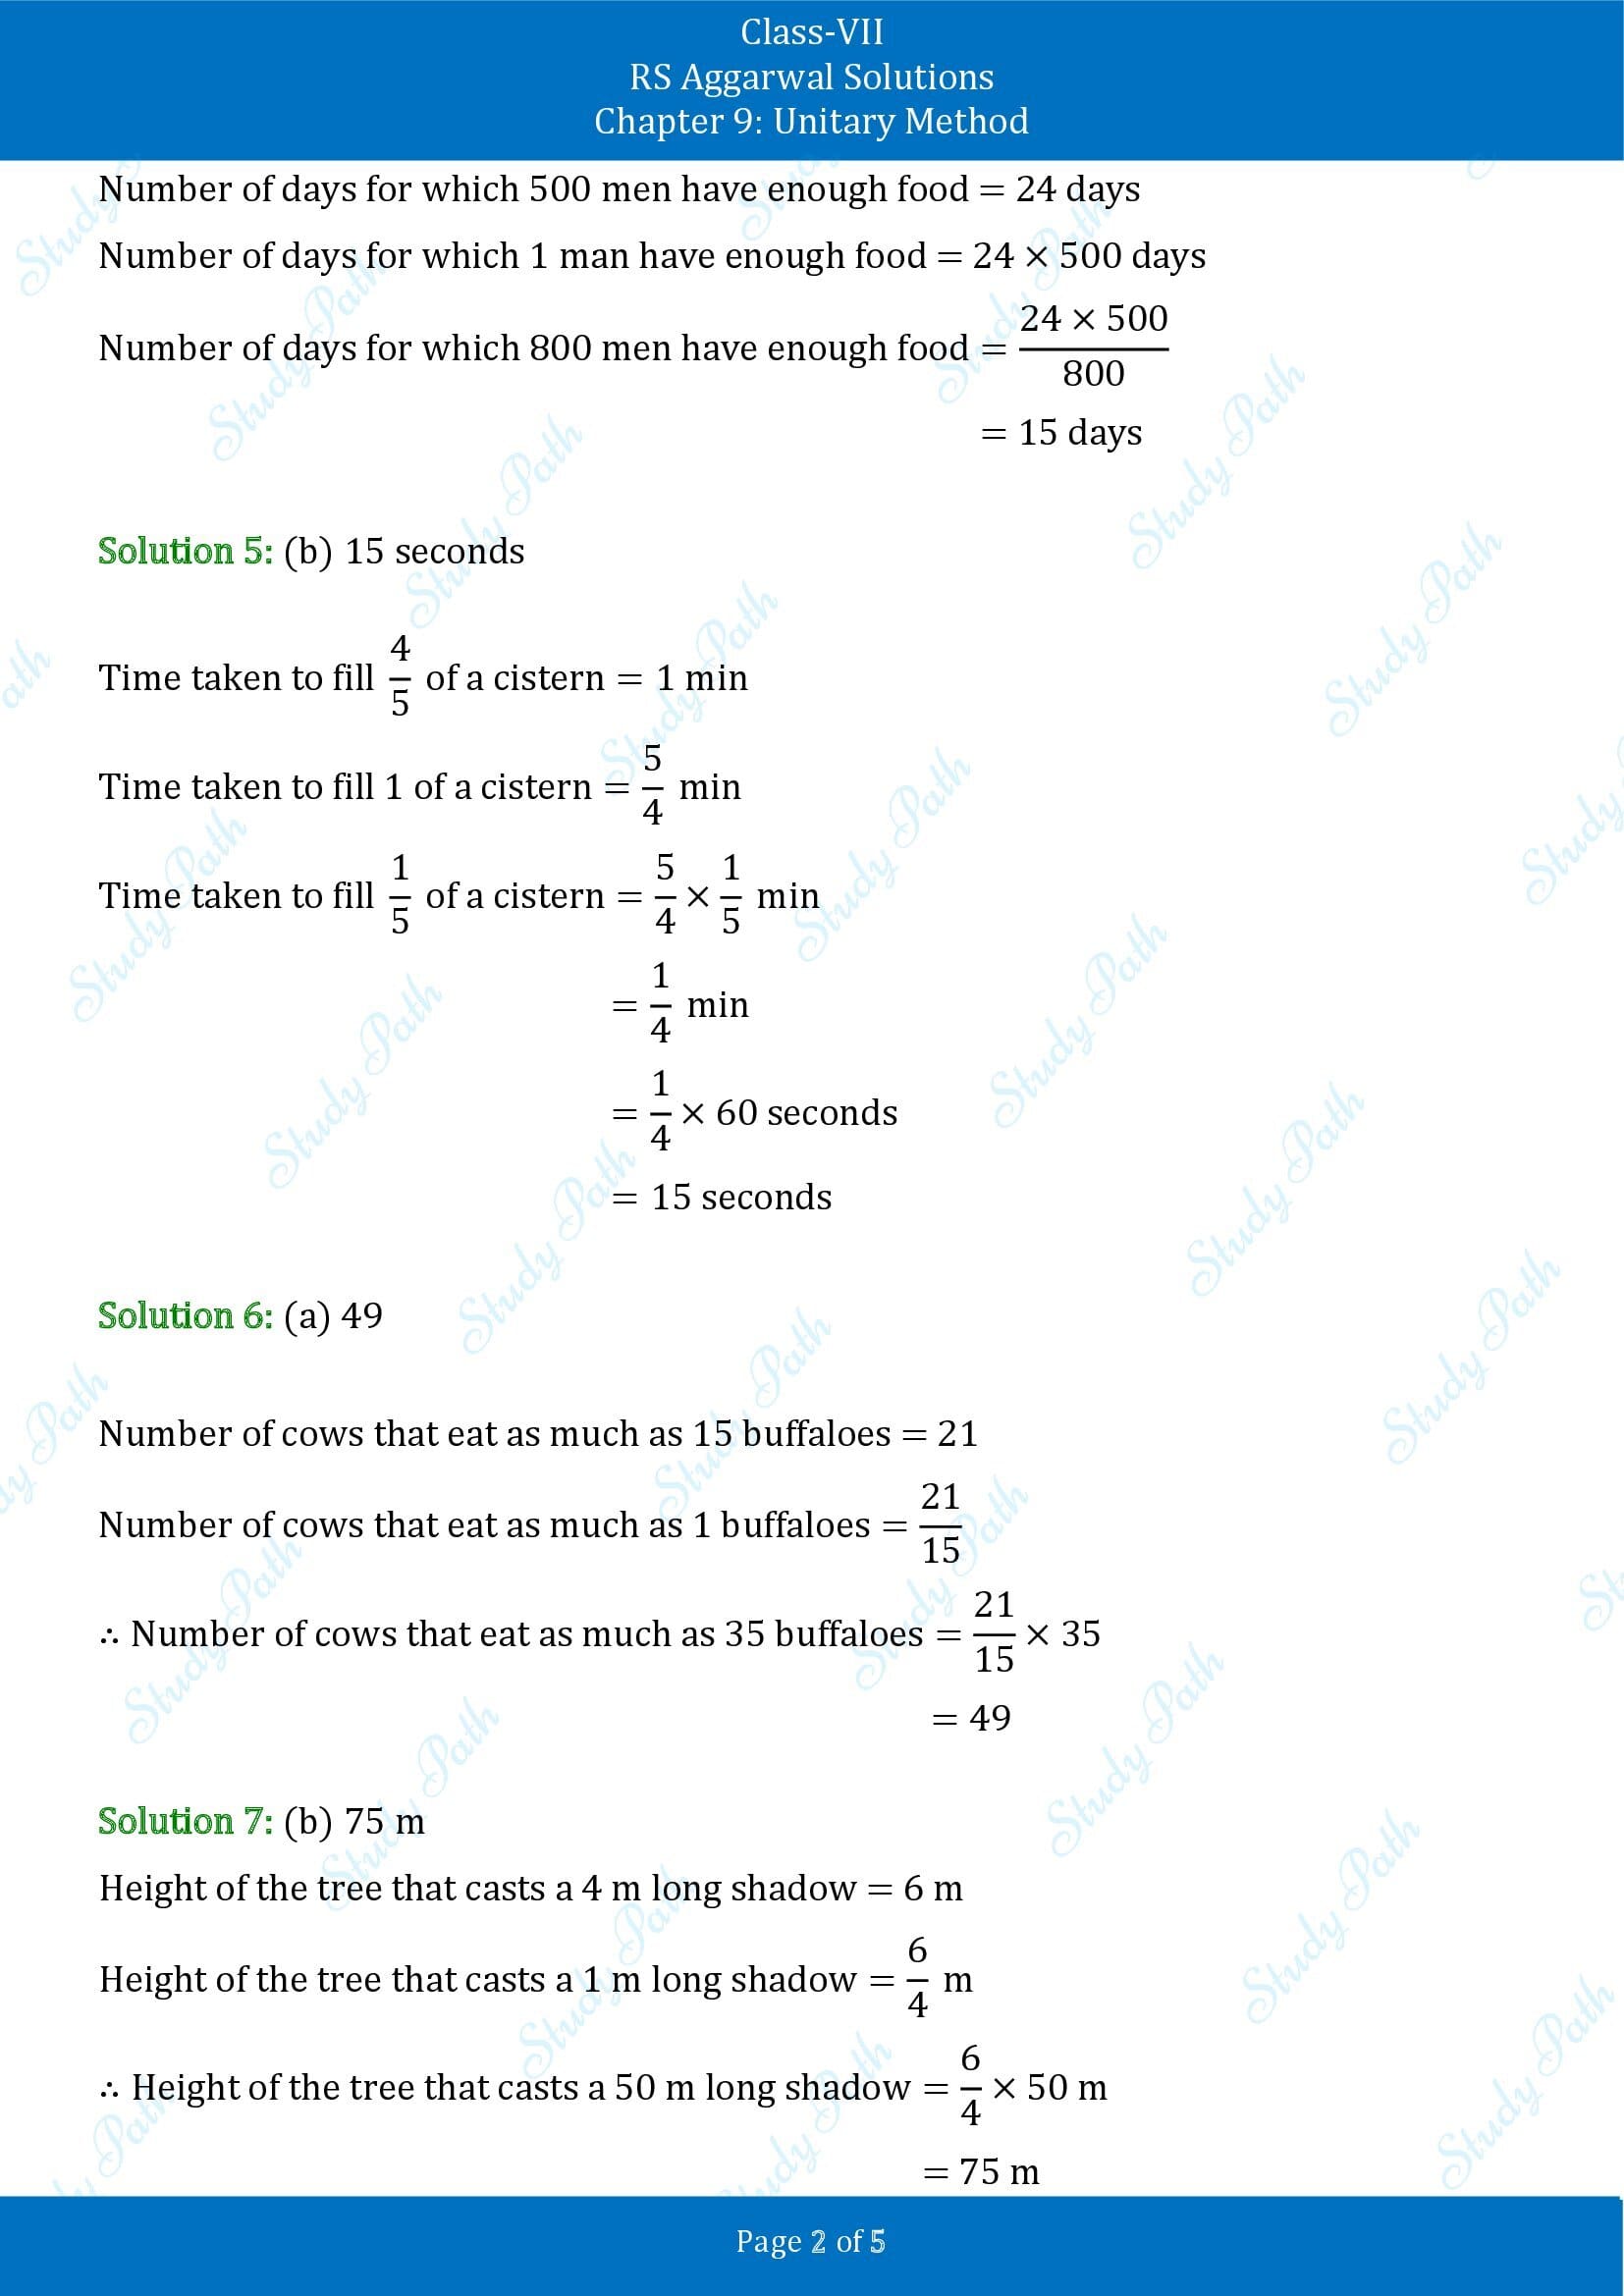 RS Aggarwal Solutions Class 7 Chapter 9 Unitary Method Exercise 9C MCQs 00002